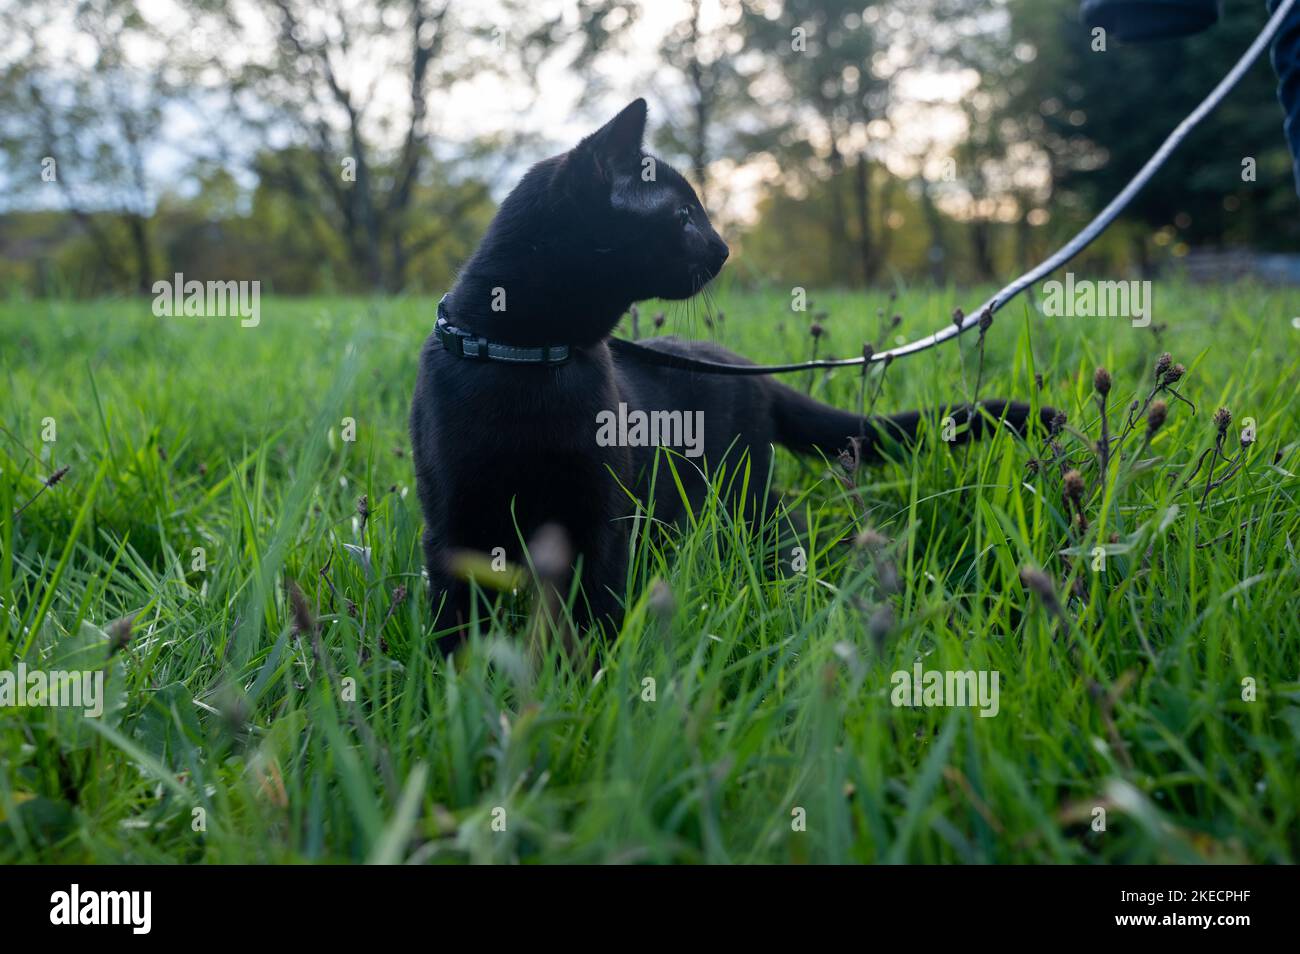 Black cat on a leash in the green grass on a meadow Stock Photo